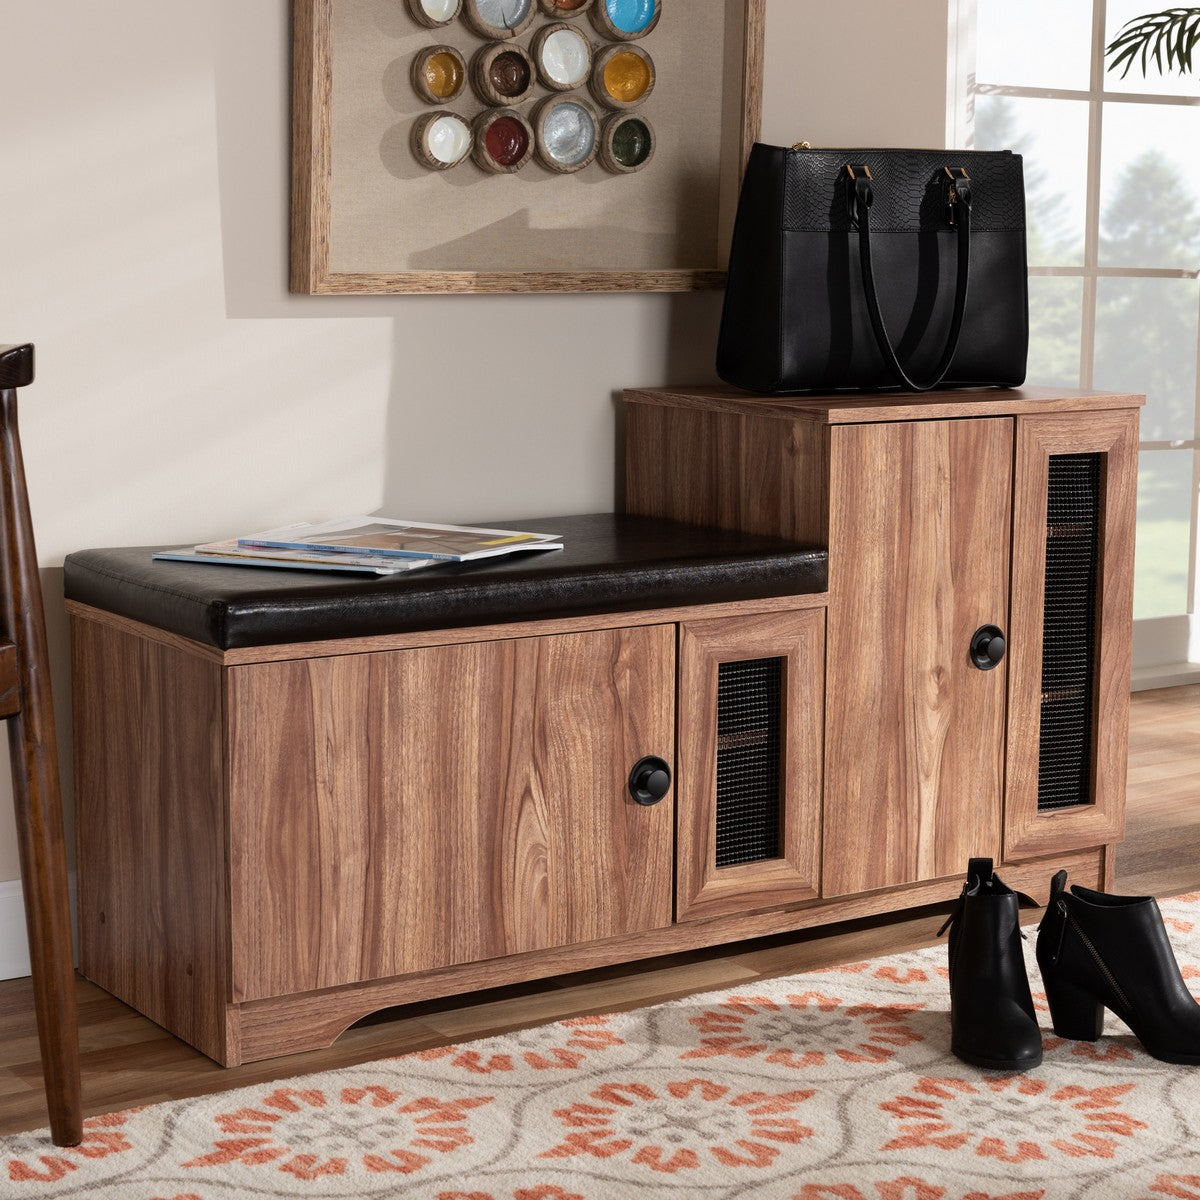 Baxton Studio Valina Modern and Contemporary Dark Brown Faux Leather Upholstered 2-Door Wood Shoe Storage Bench with Cabinet